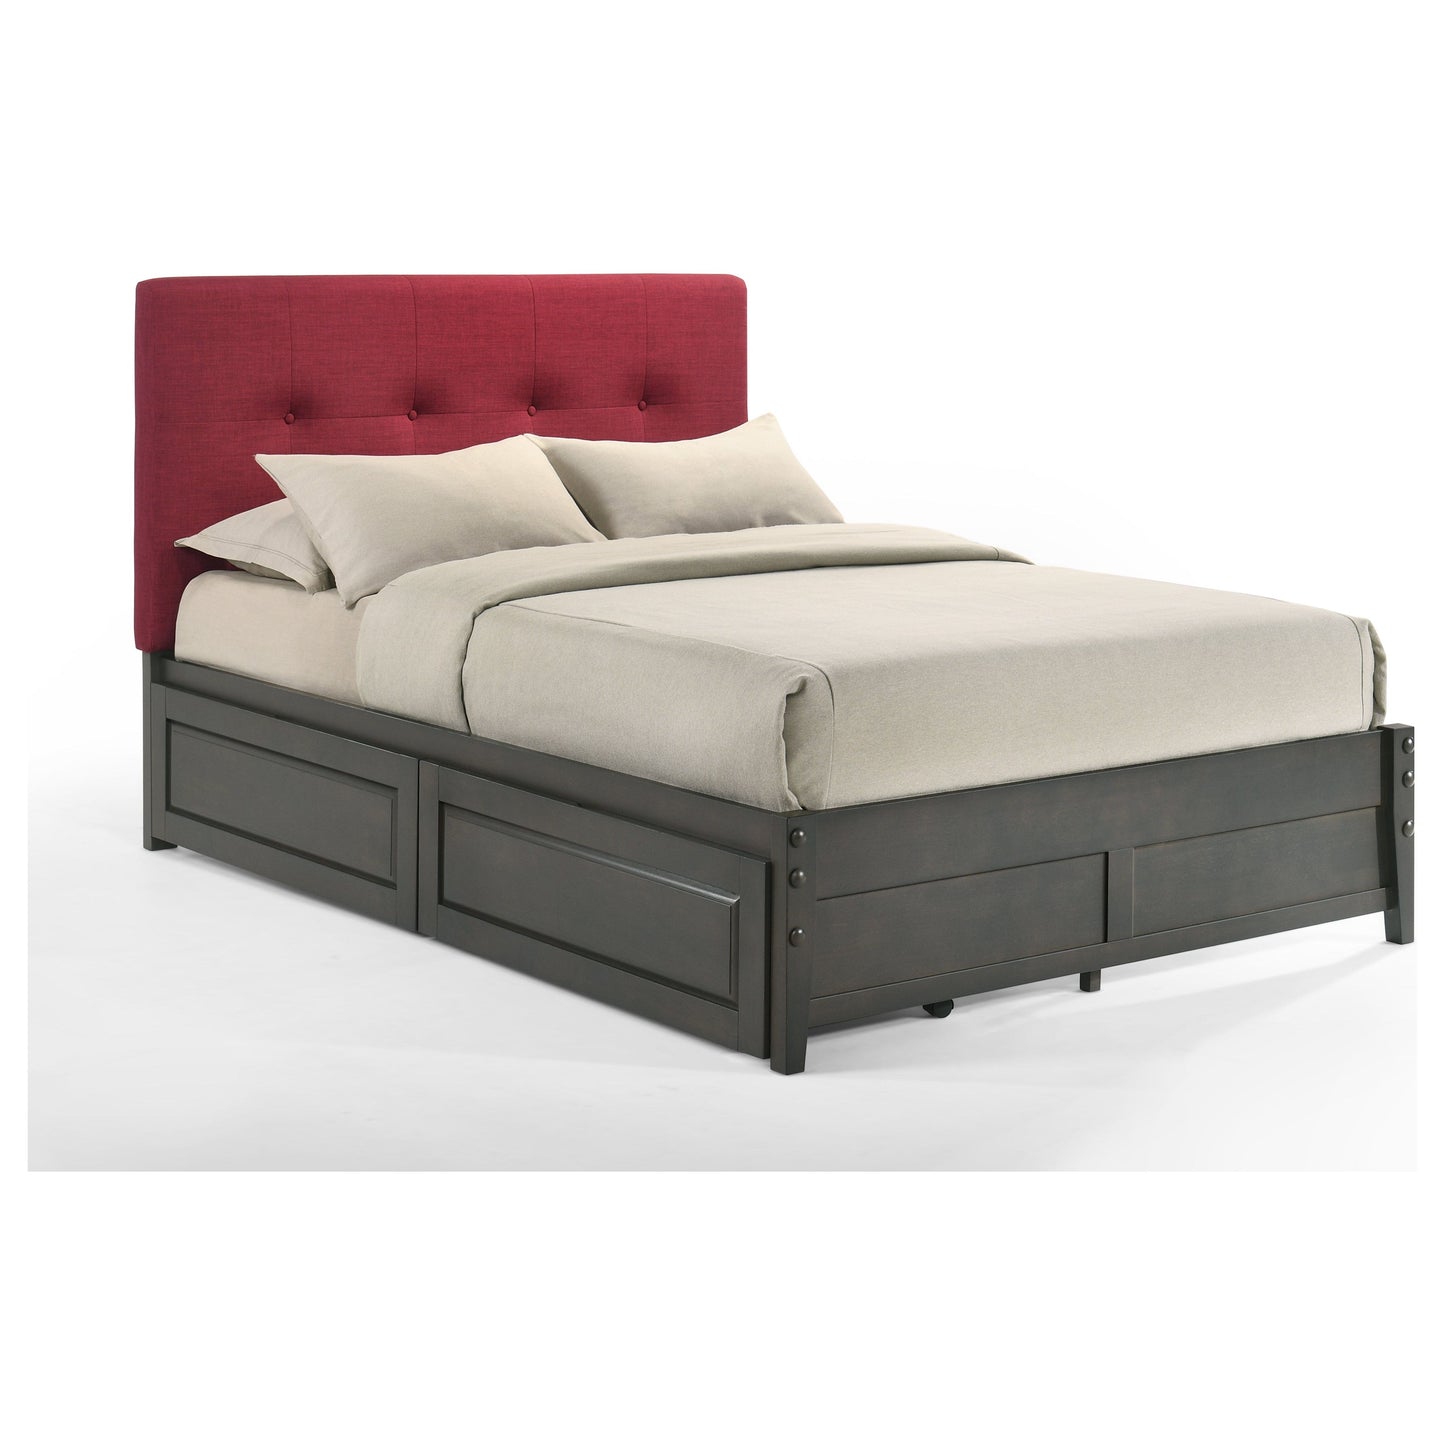 Night and Day Paprika Queen Bed in Red with Stonewash Finish Frame (K Series)